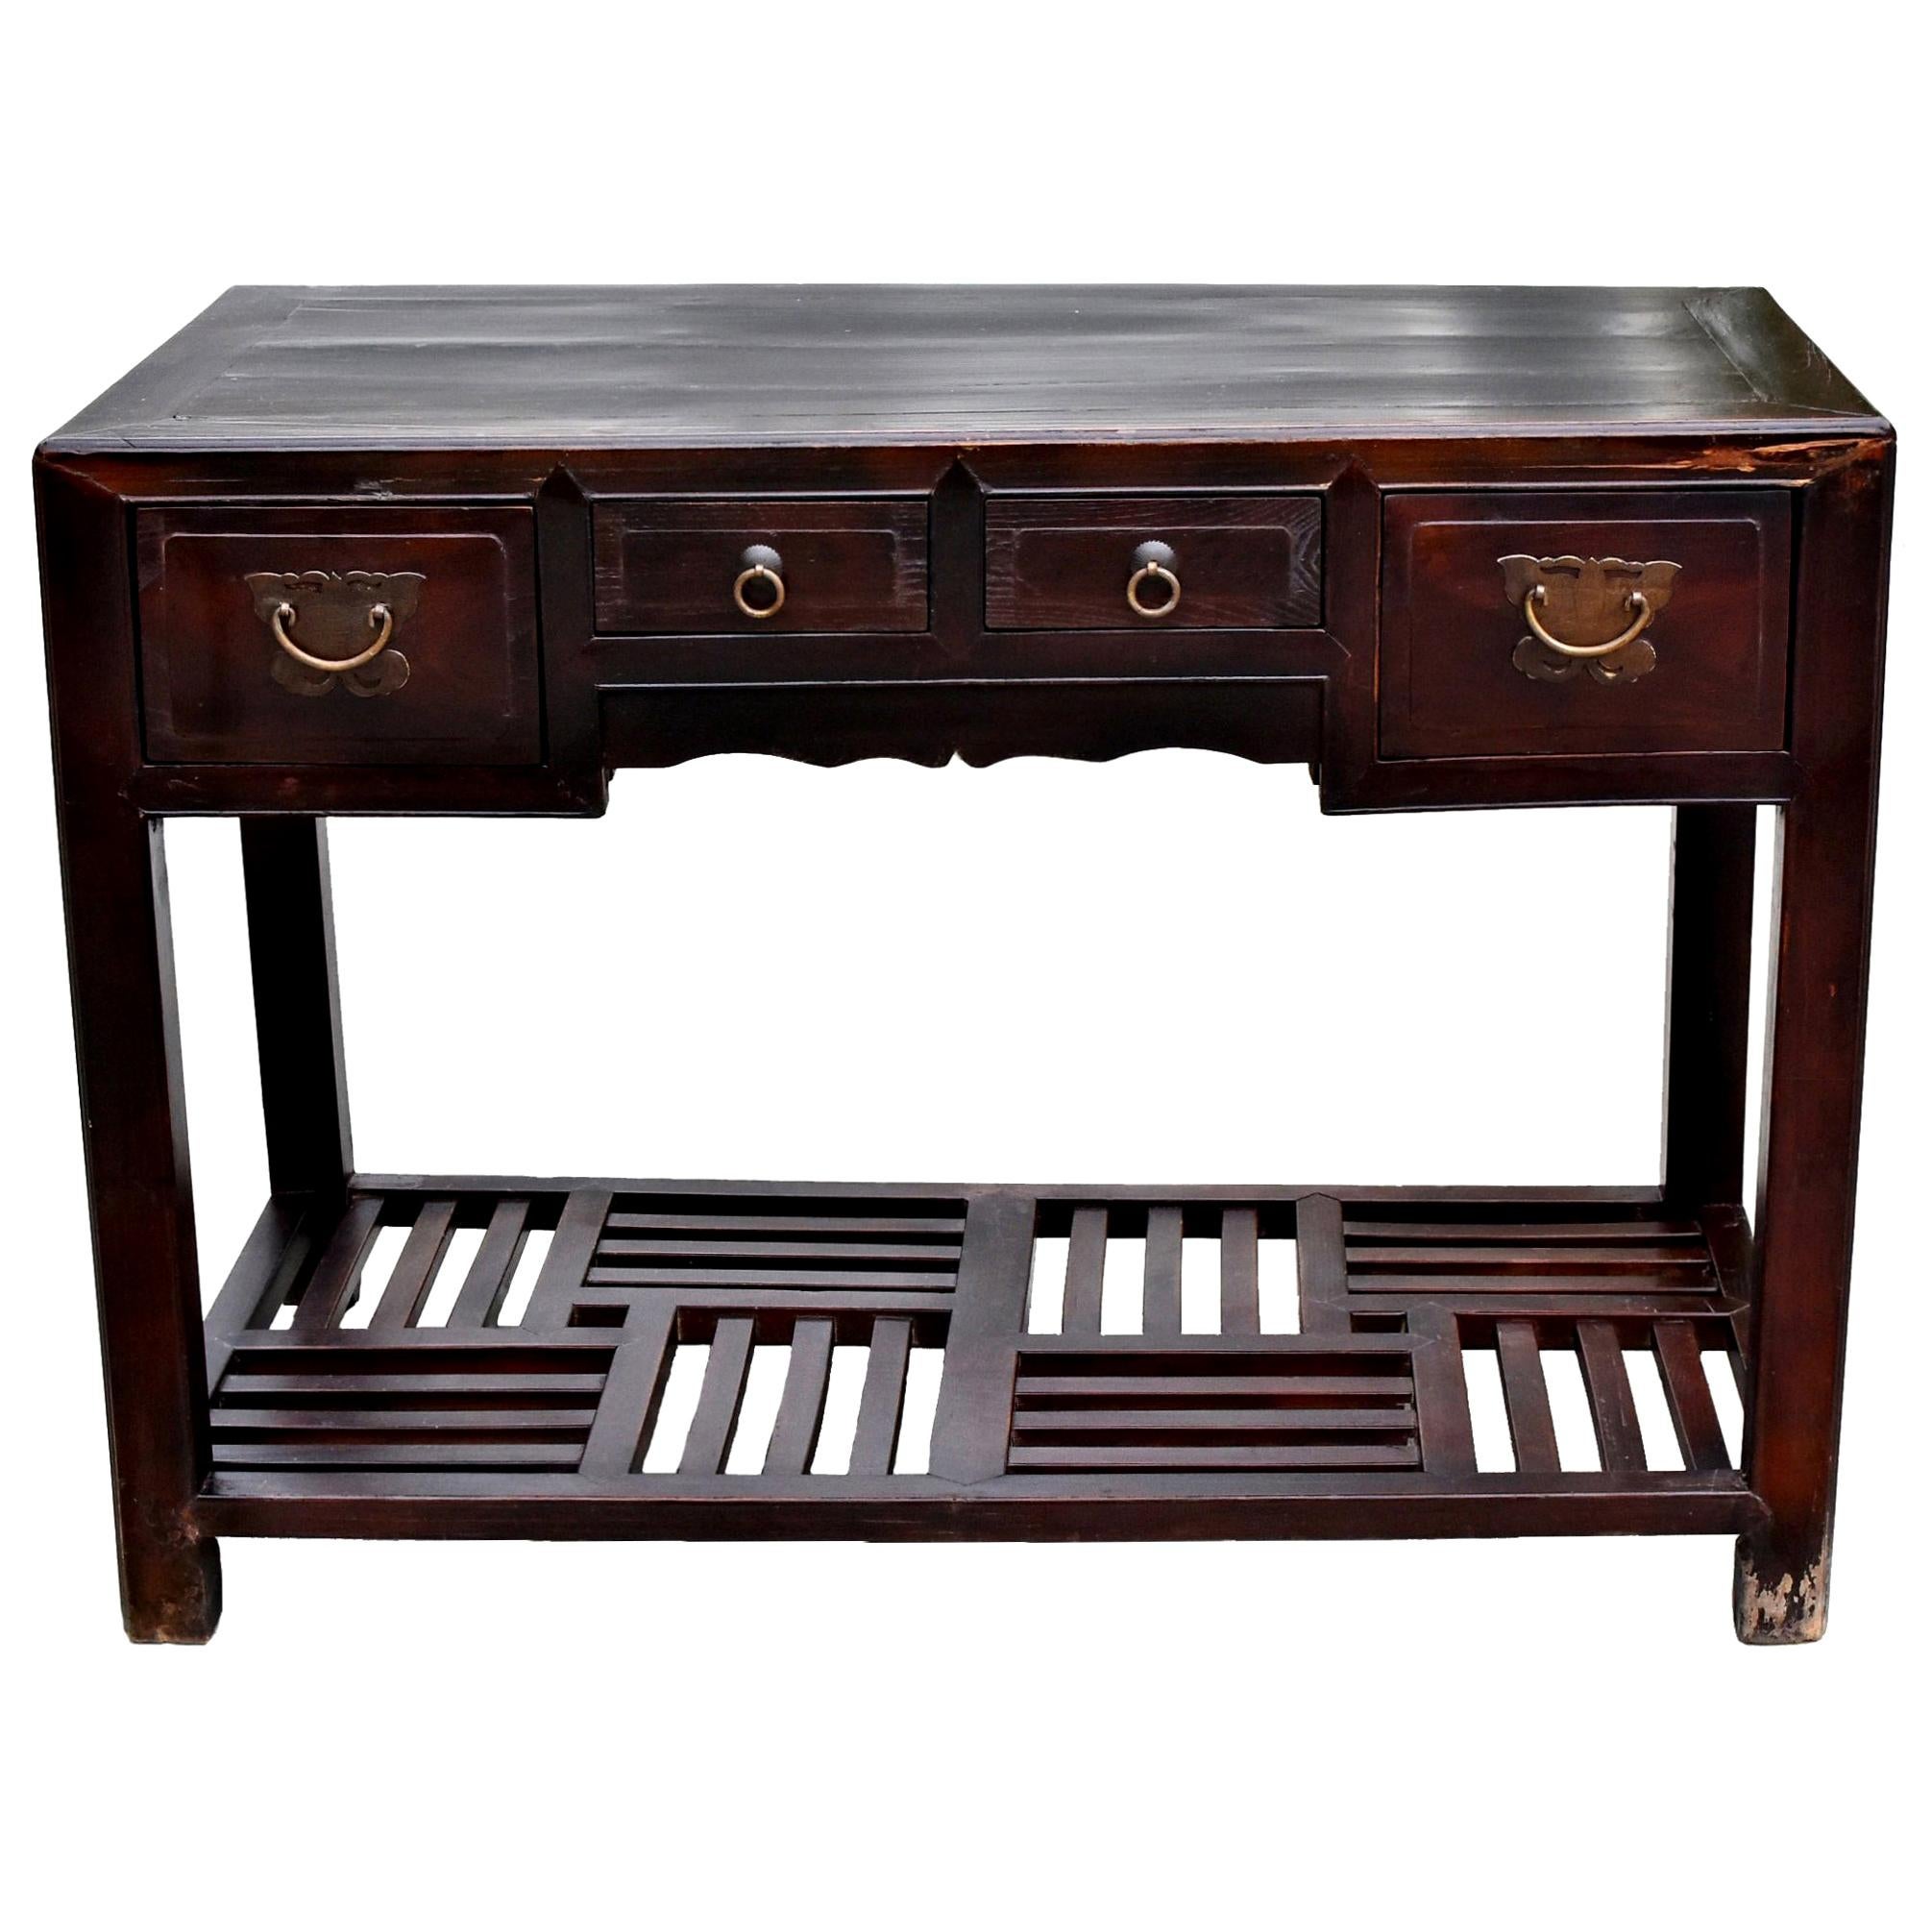 Chinese Antique Desk with Butterfly Hardware